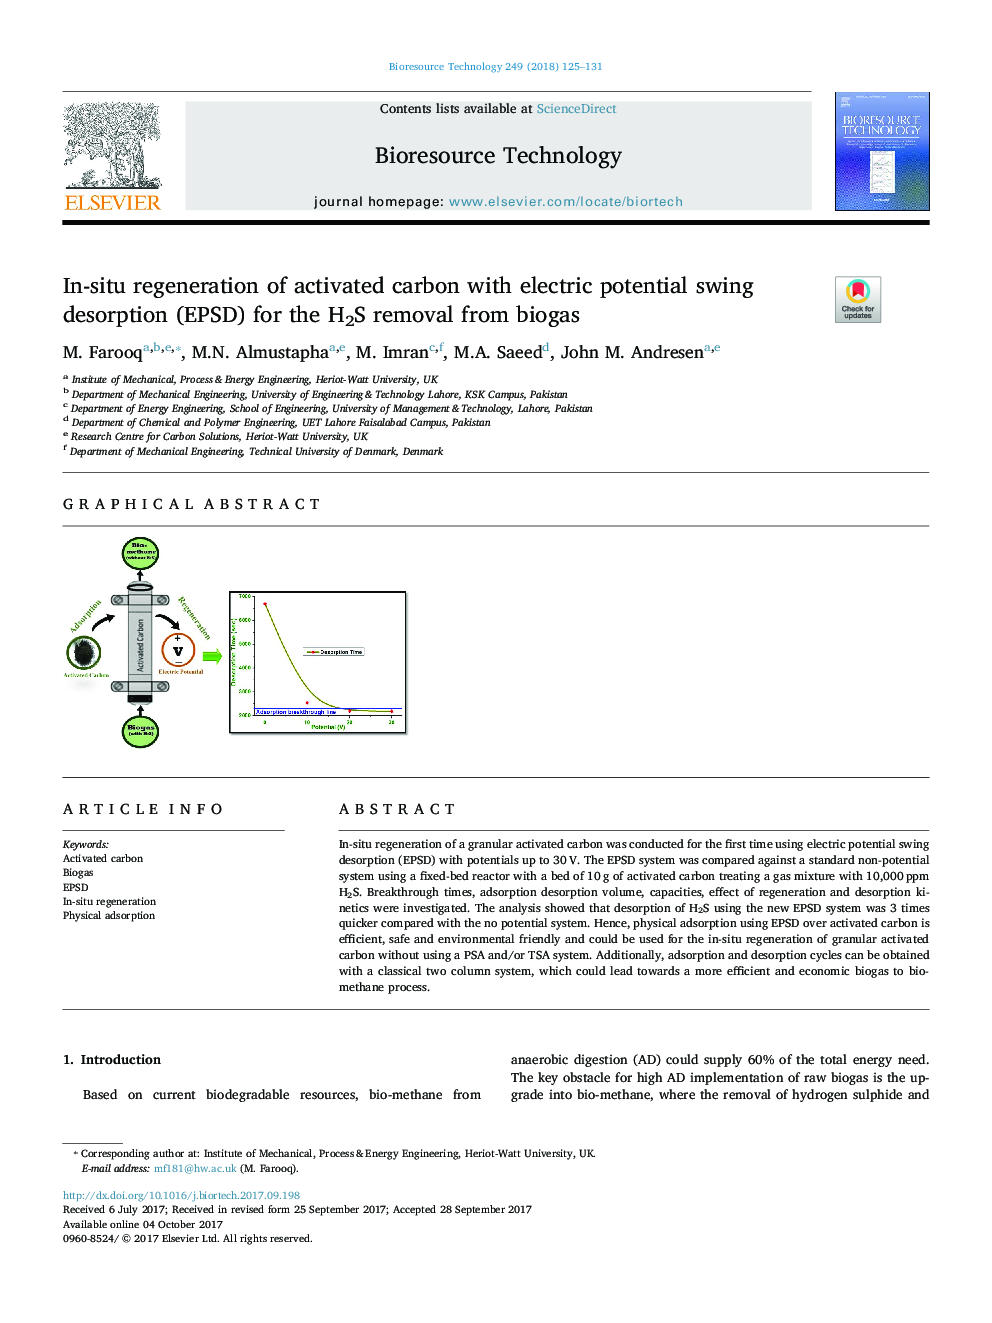 In-situ regeneration of activated carbon with electric potential swing desorption (EPSD) for the H2S removal from biogas